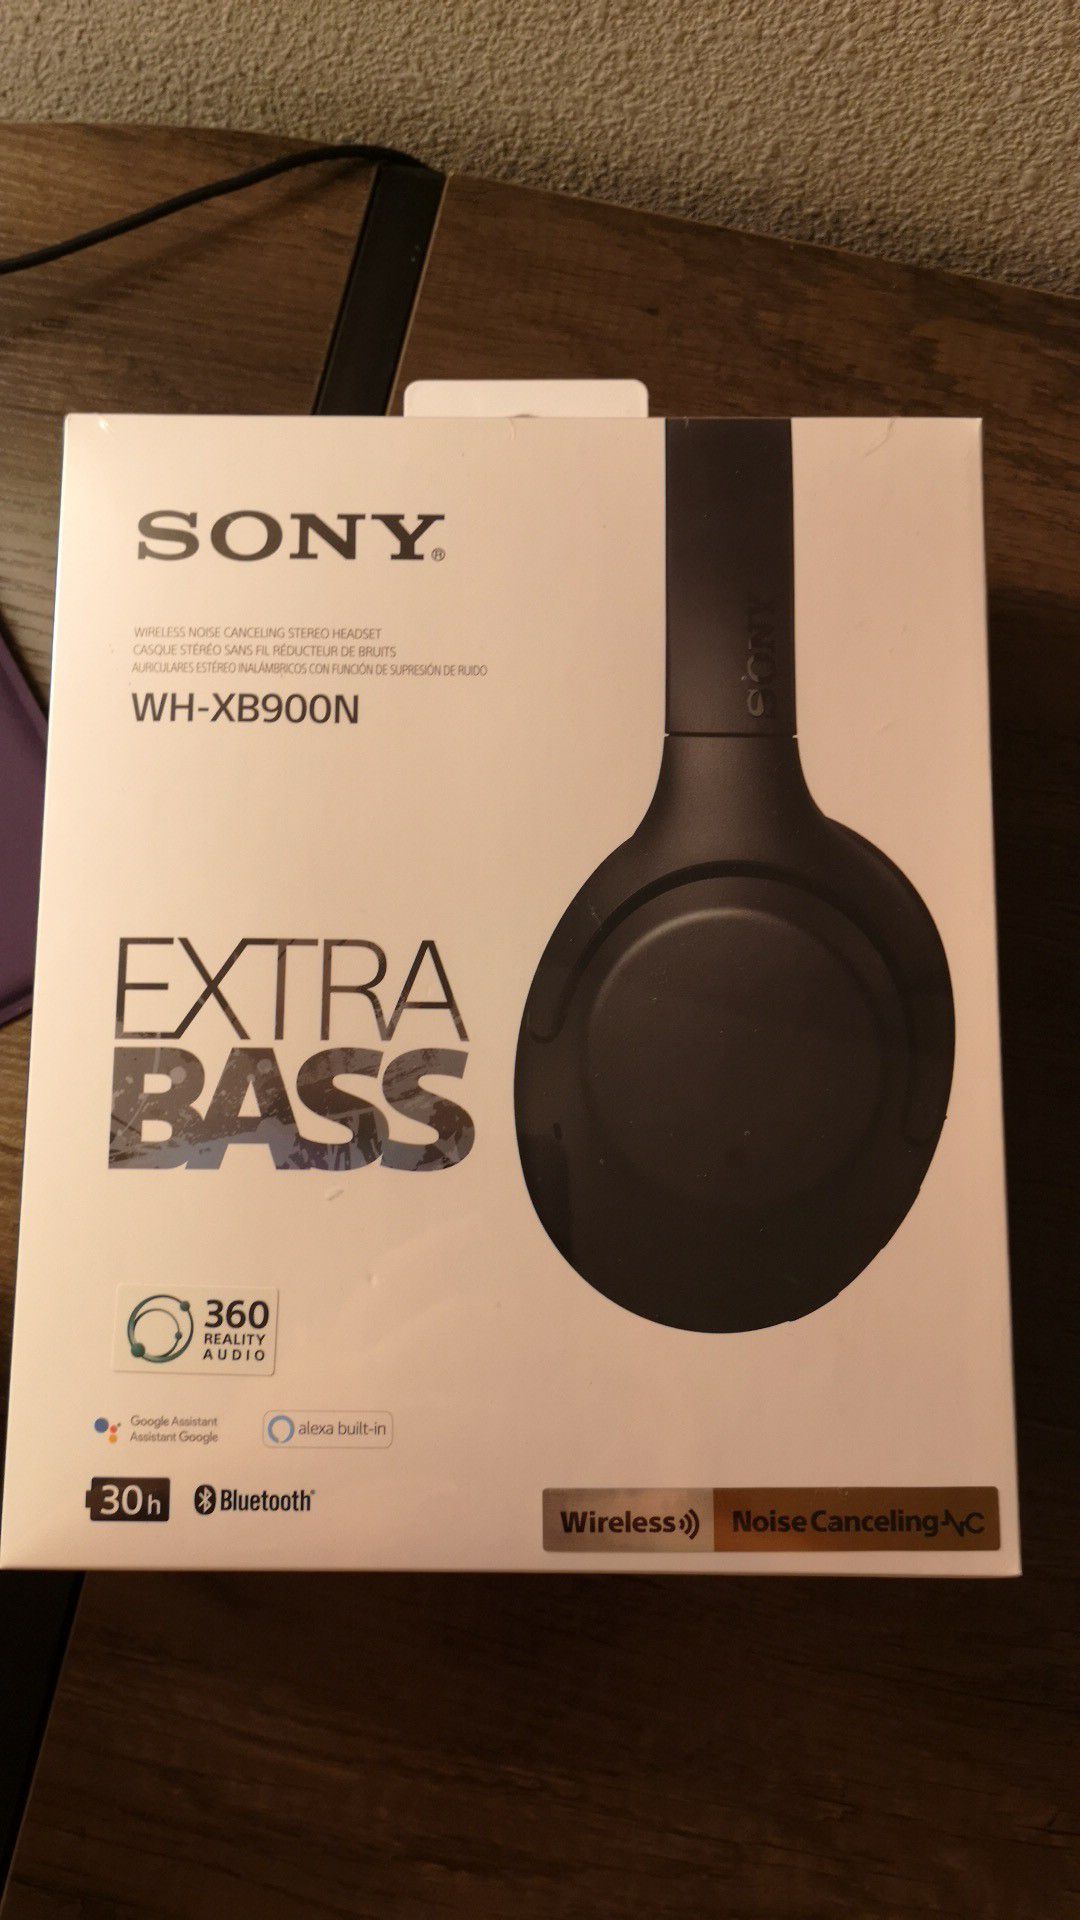 Sony WHXB900N Noise cancelling headphone, Wireless Bluetooth over the ear headset-black